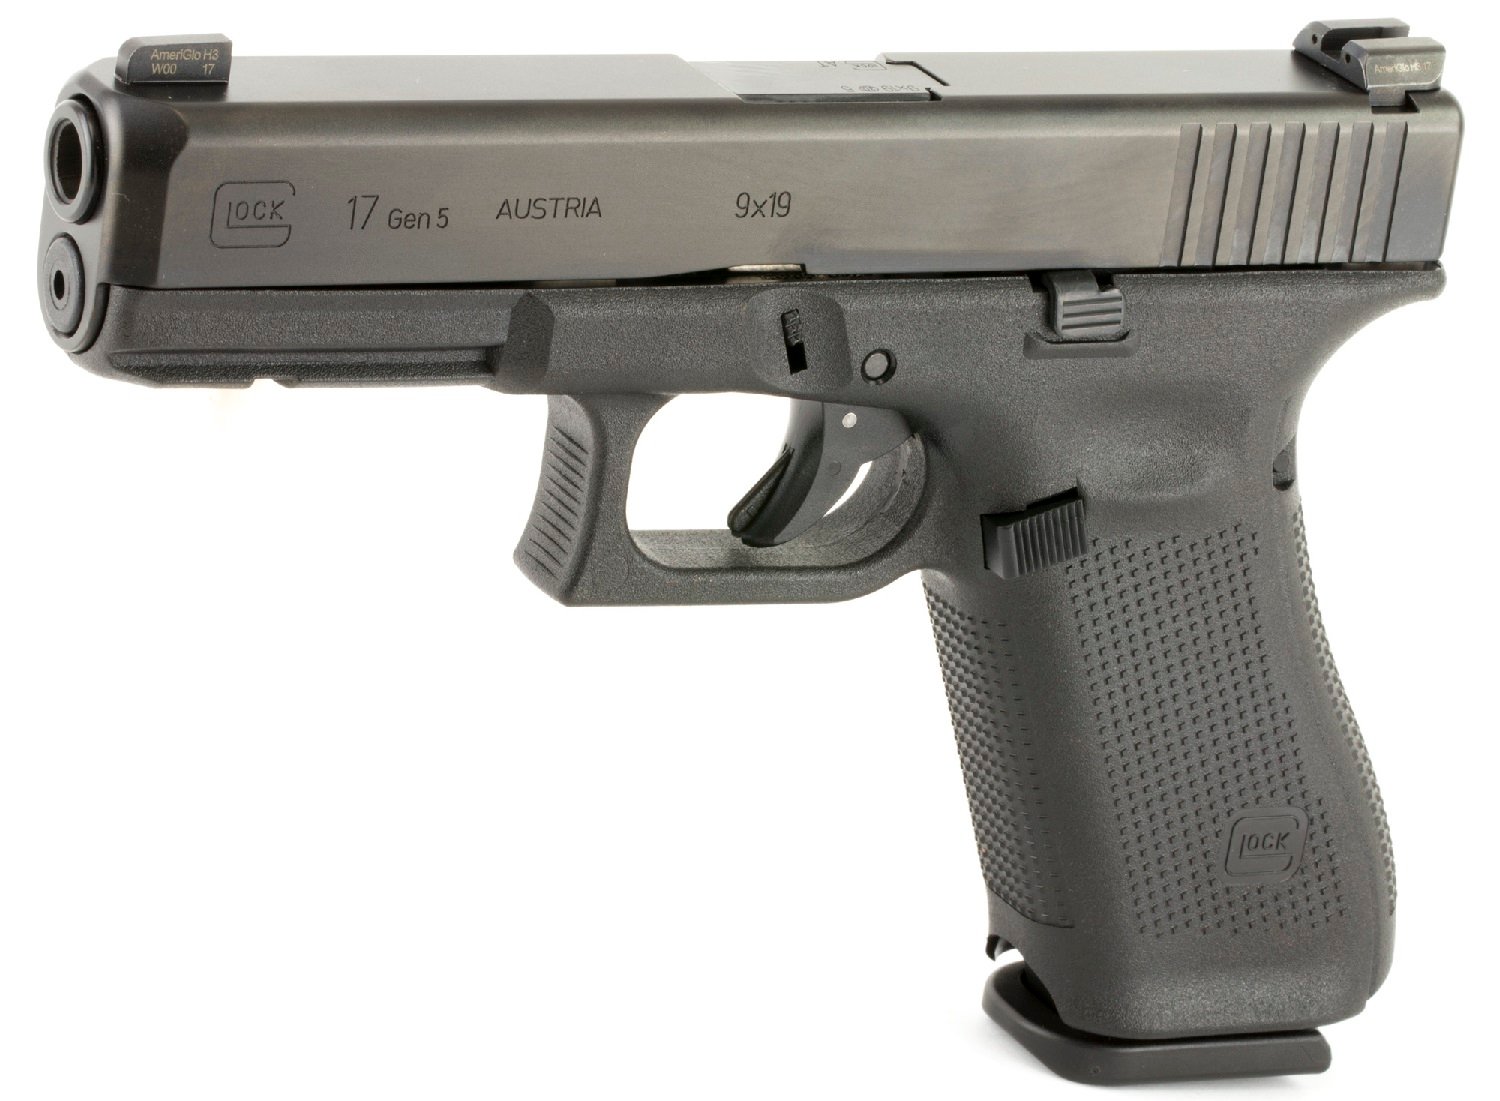 The Glock 17 Hasn't Been Adopted by the World's Armed Forces for 1 Reason